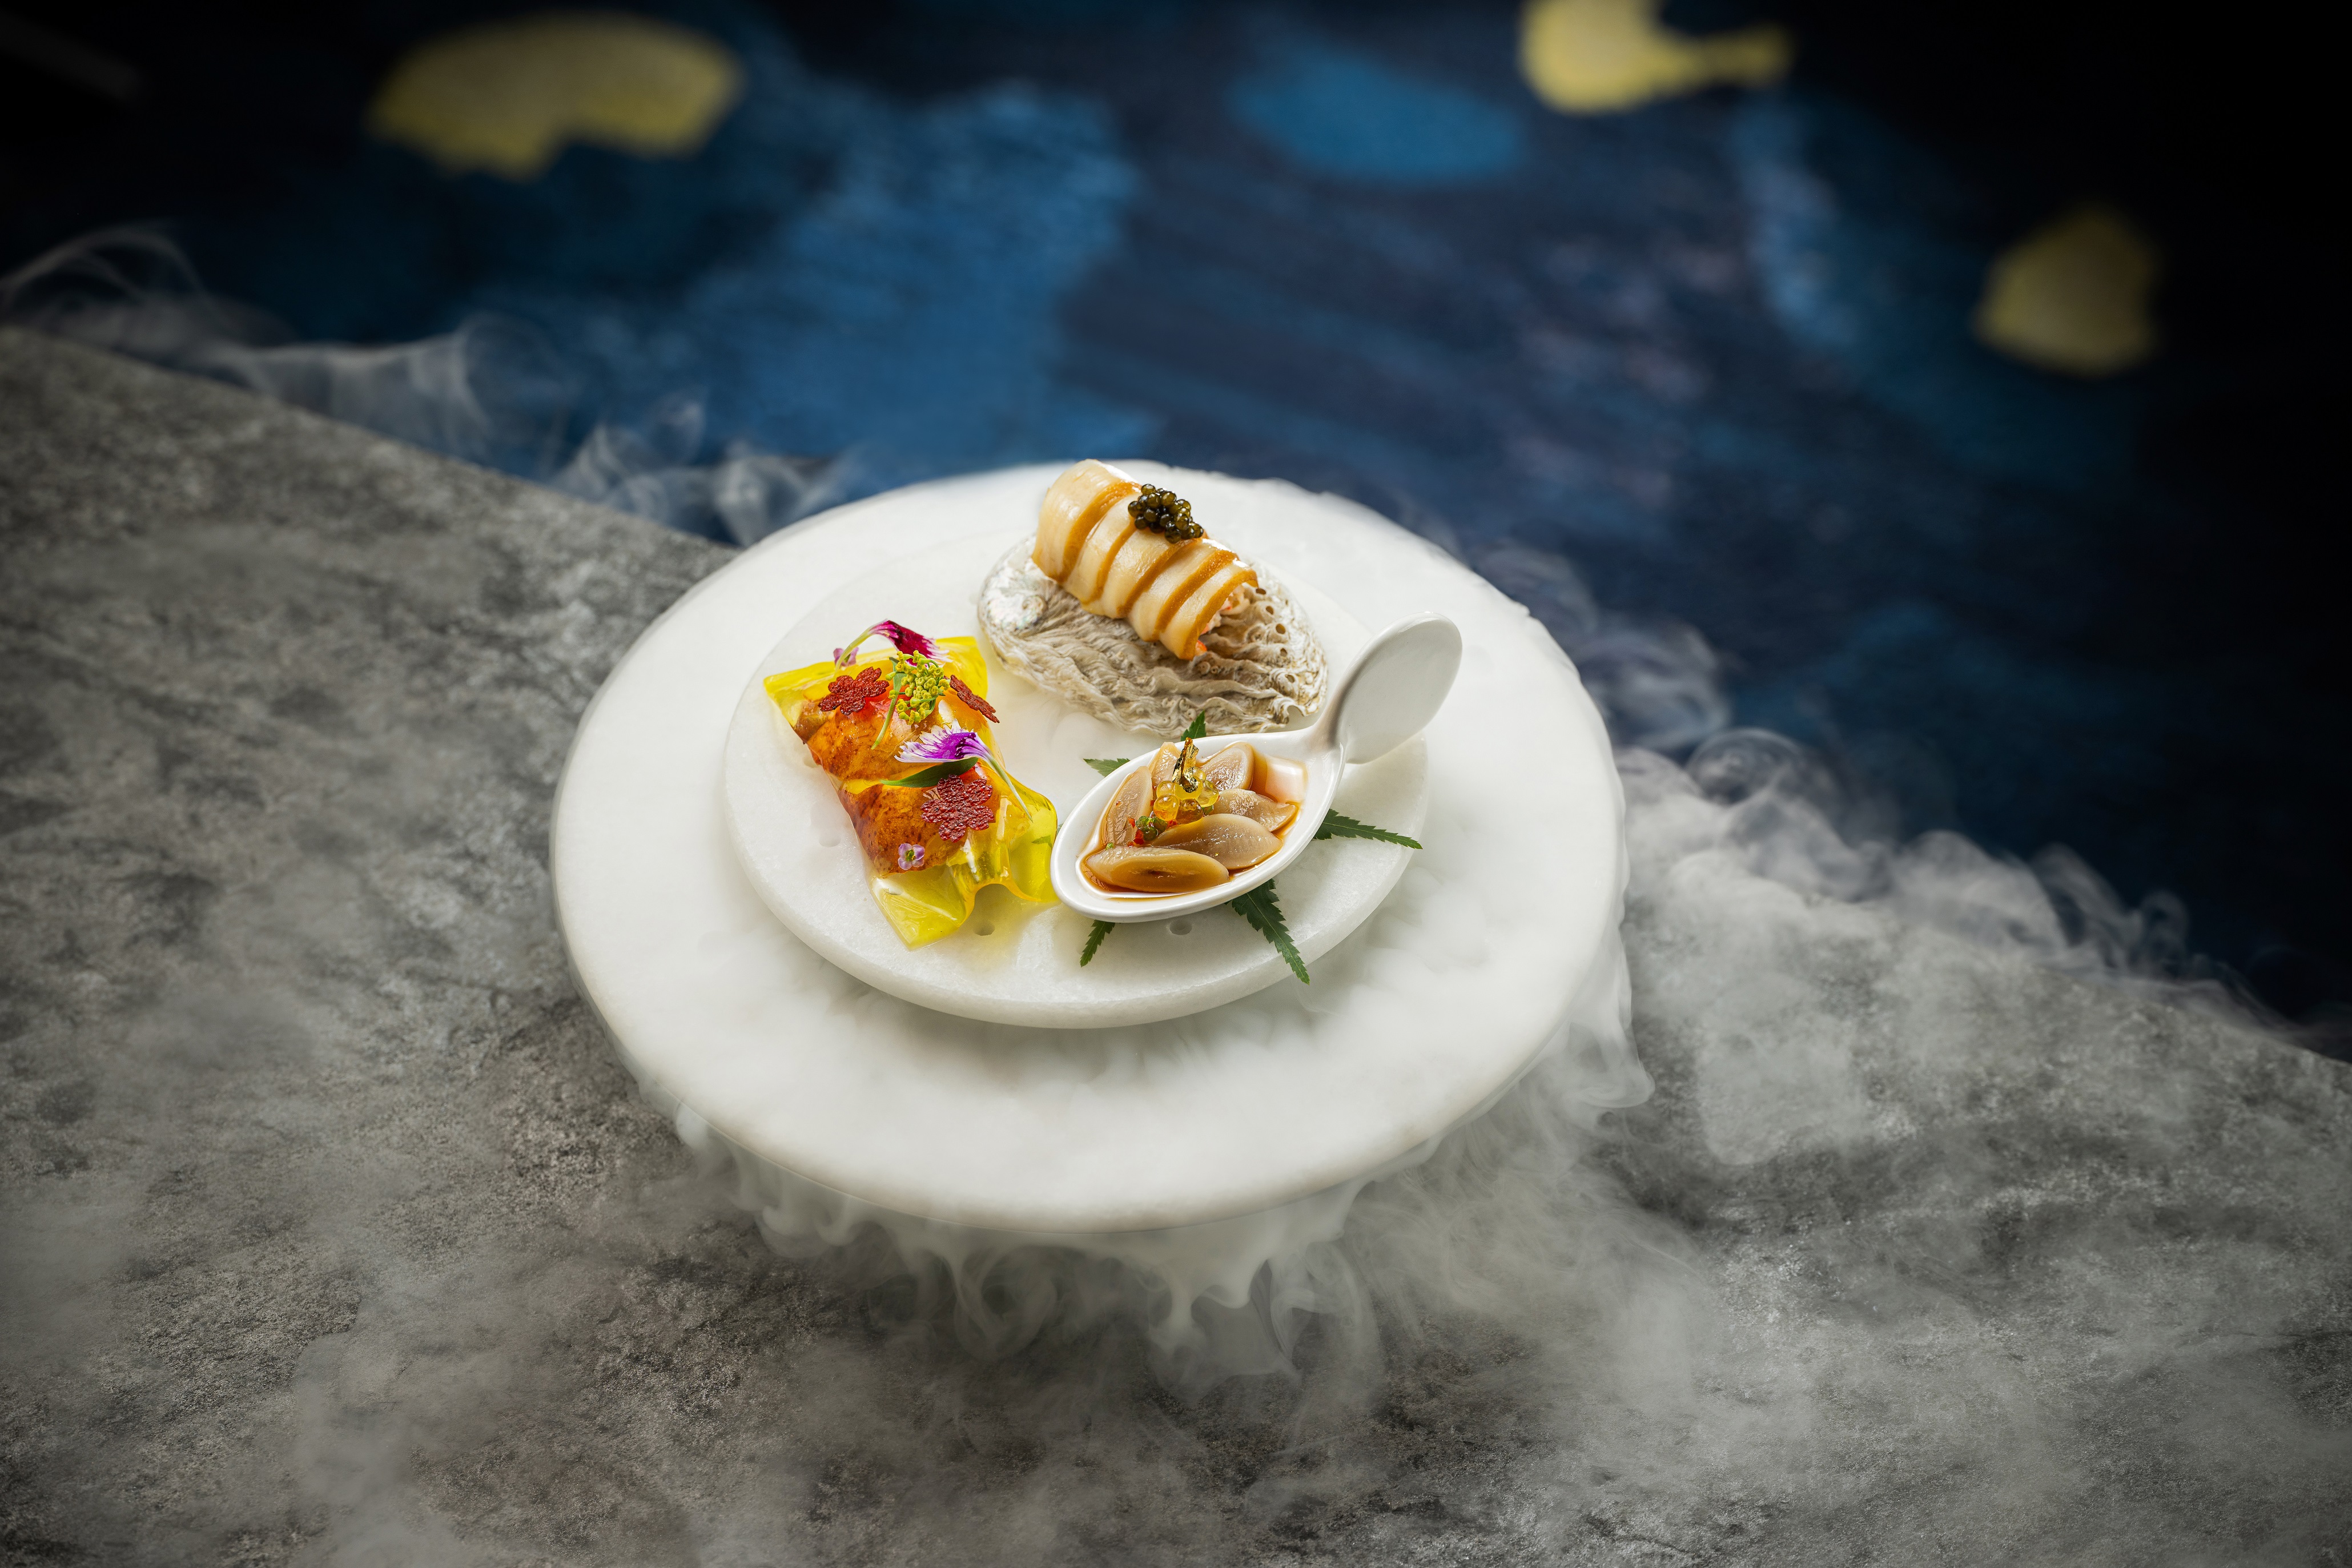 Chilled French Blue Lobster in Osmanthus Wine, Marinated South African Abalone in Yellow Wine, Drunken Razor Clam with Lychee Wine, by Pearl Dragon